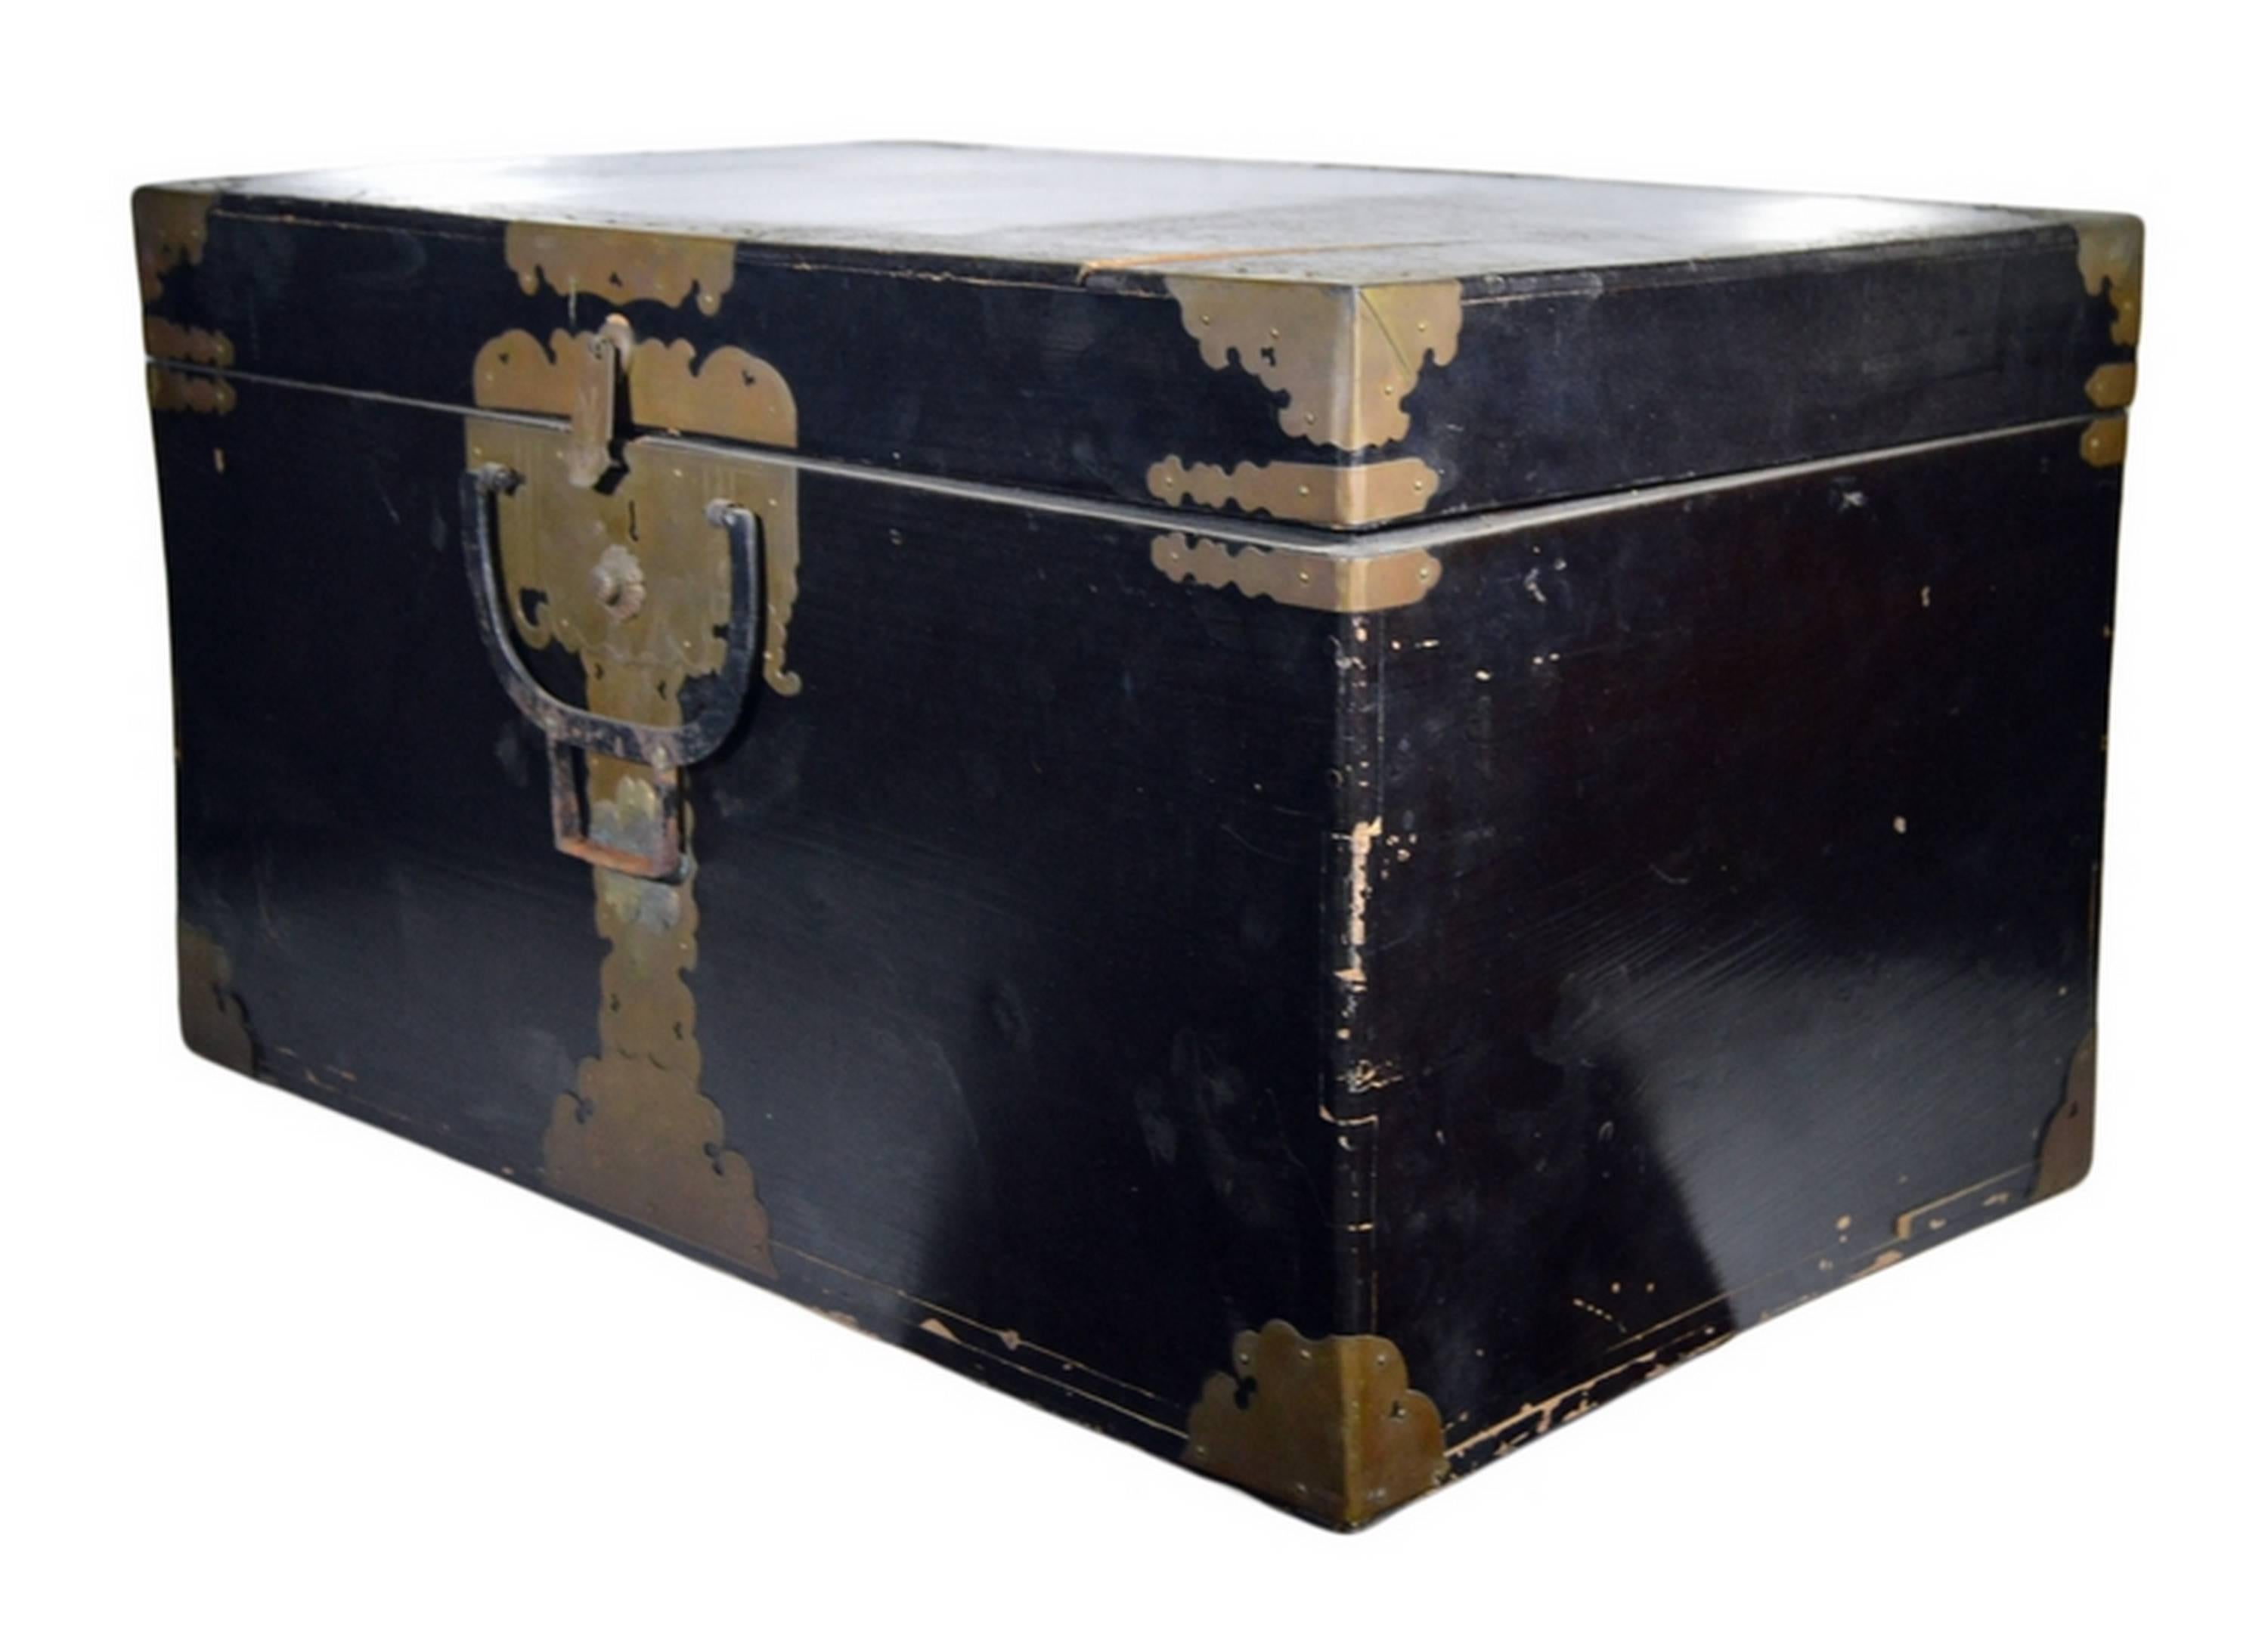 This 19th century chest was made in Japan with dark lacquered wood and brass hardware. This rectangular wooden chest is covered with an attractive dark and shiny lacquer. Carved brass hardware reinforces the corners and adorns the front center,